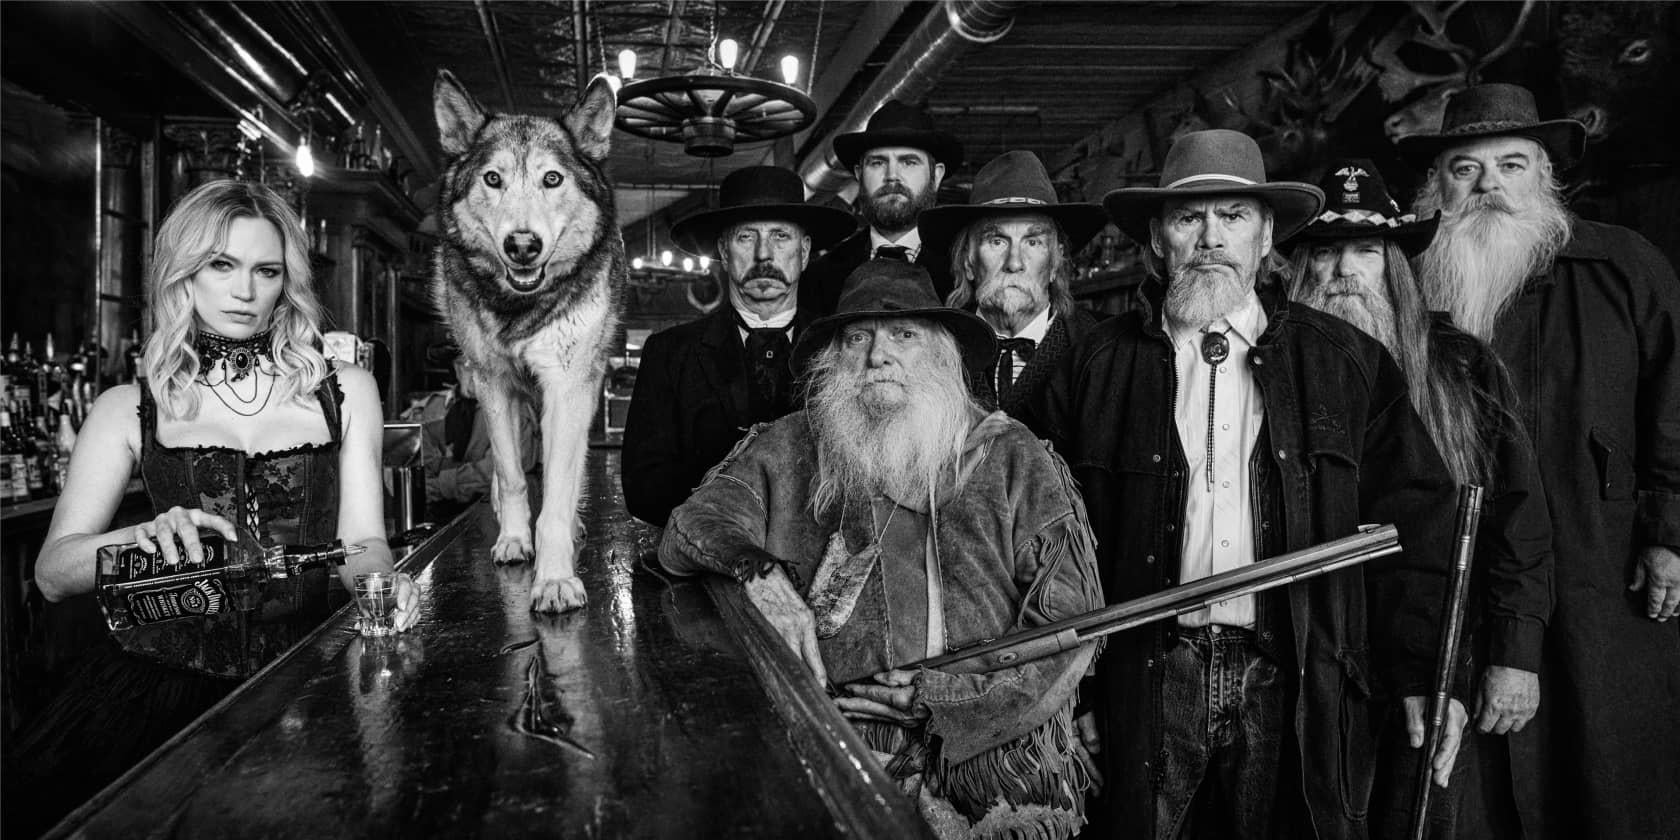 David Yarrow Black and White Photograph - More Usual Suspects